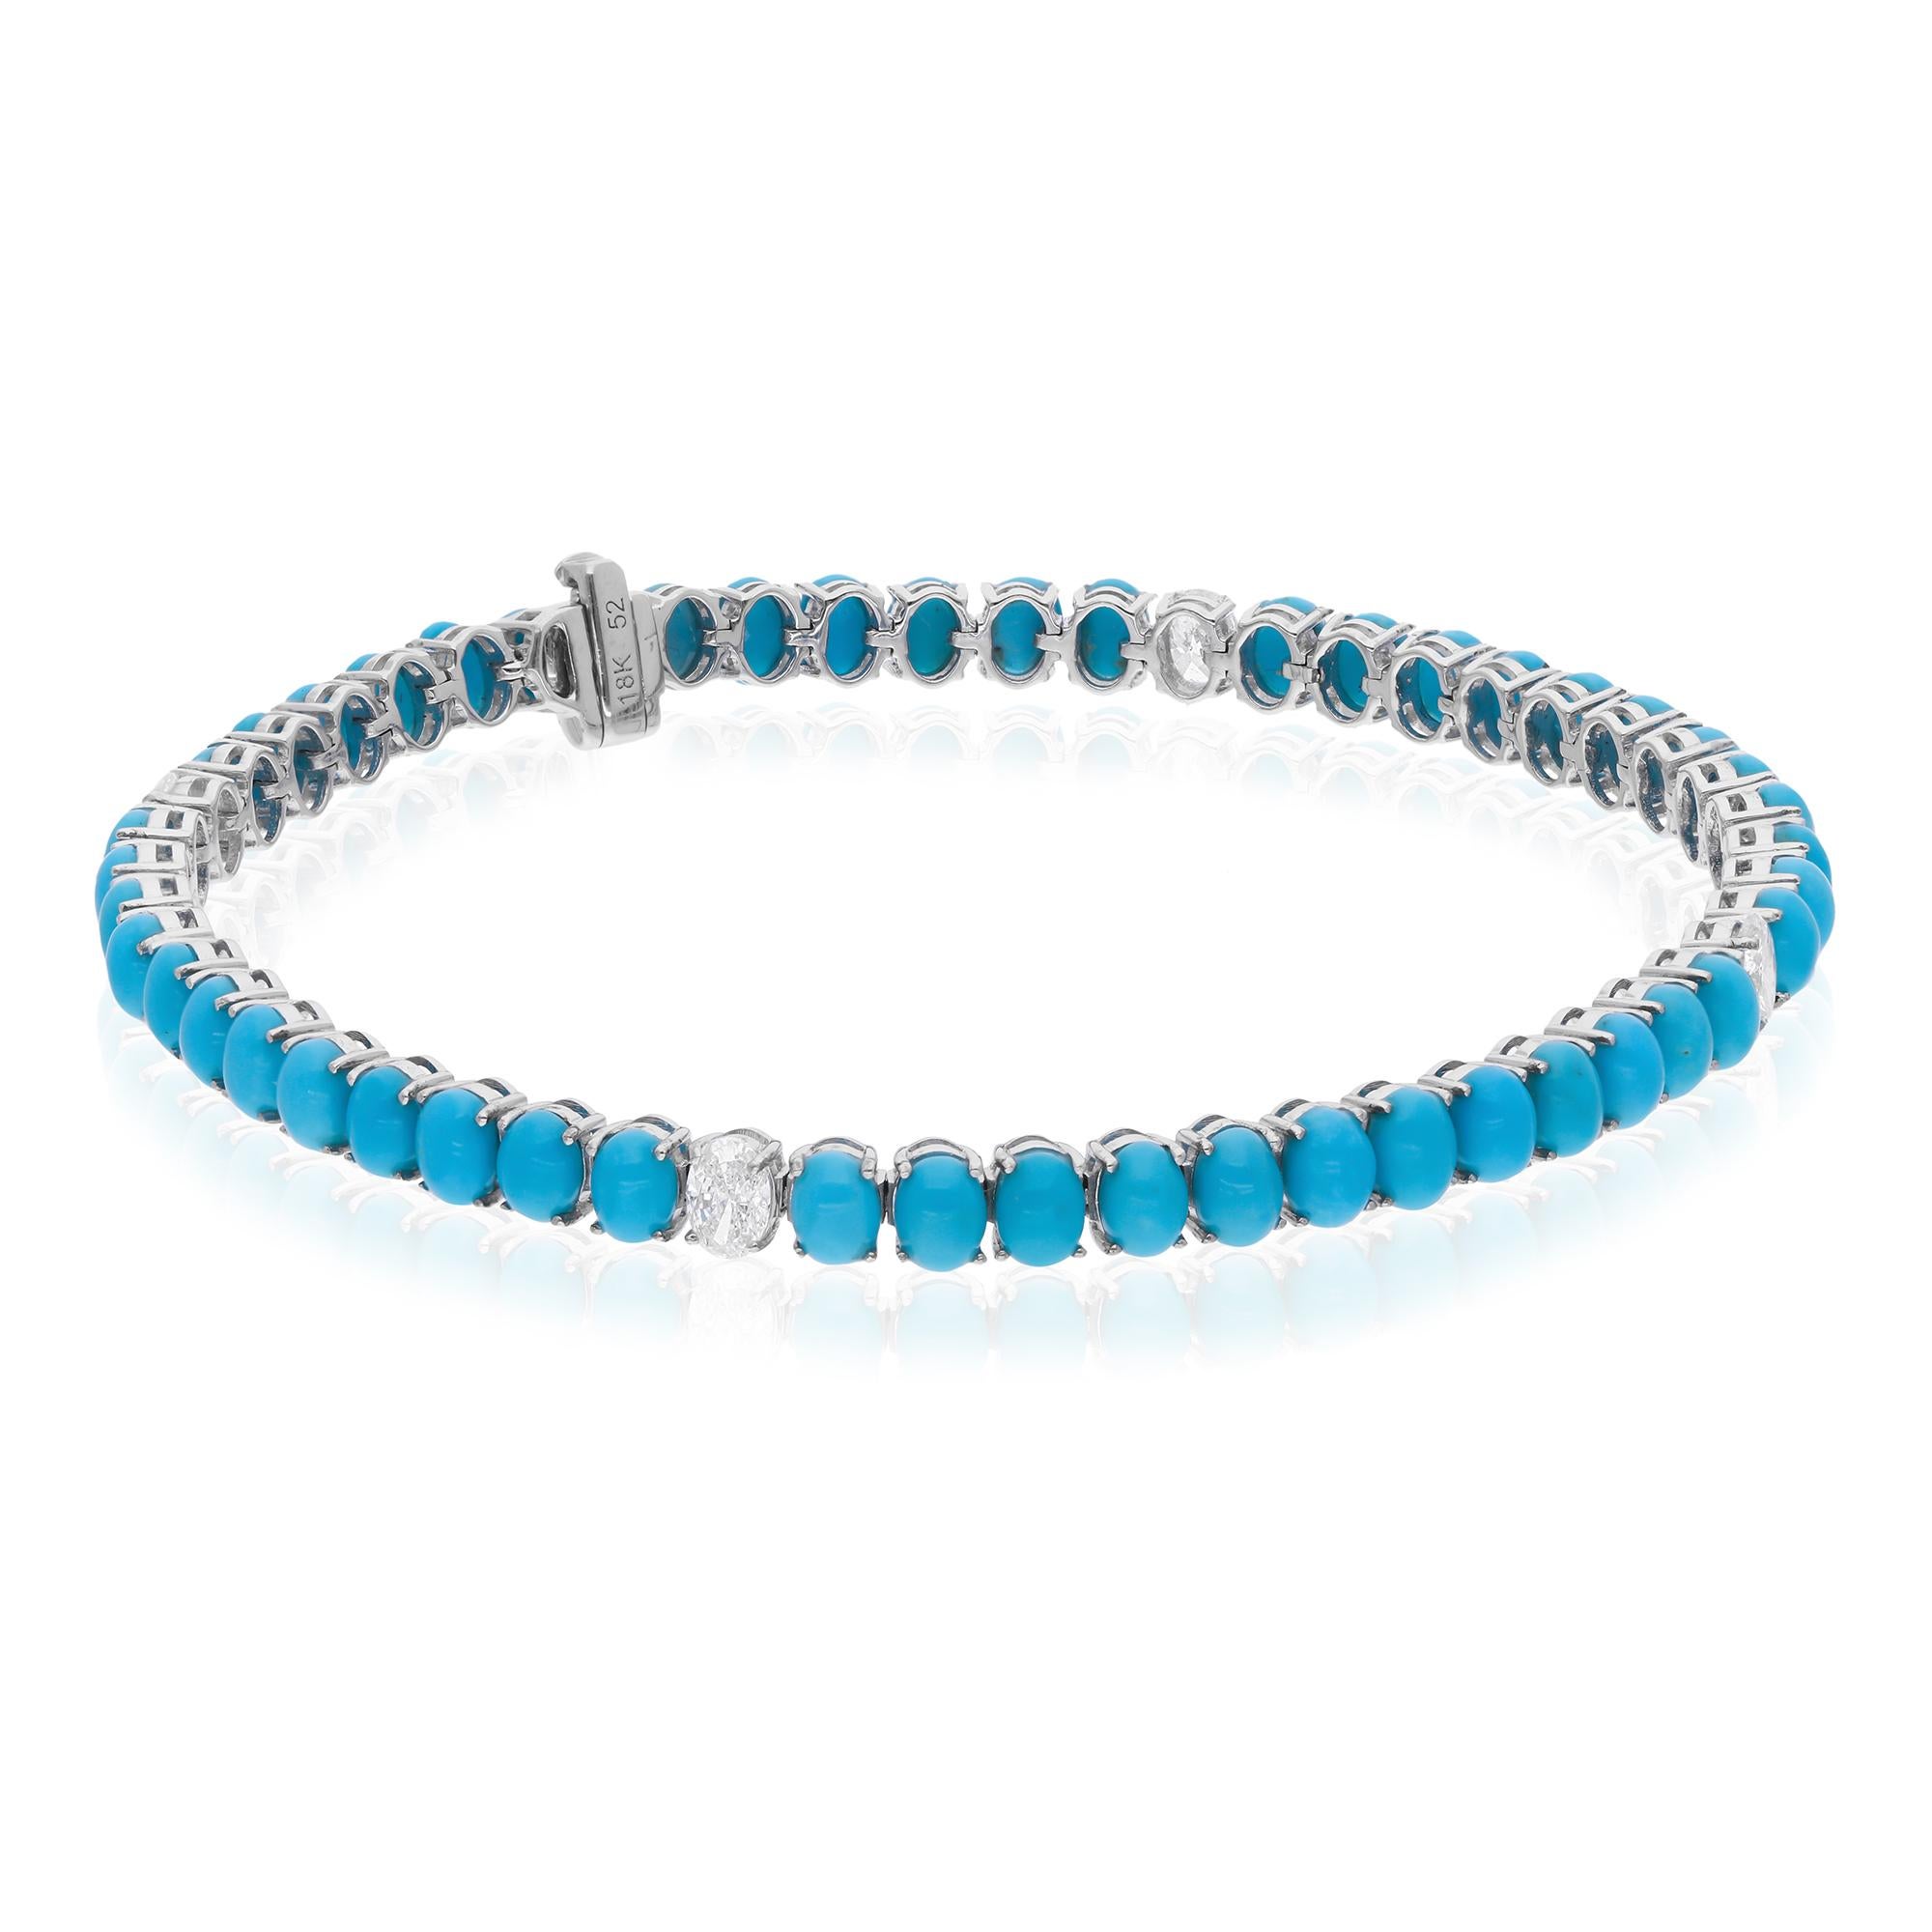 At its heart lies the magnificent Arizona Turquoise gemstone, renowned for its stunning hue reminiscent of the vast southwestern skies. The turquoise, with its striking blue-green coloration, evokes a sense of tranquility and natural beauty, making